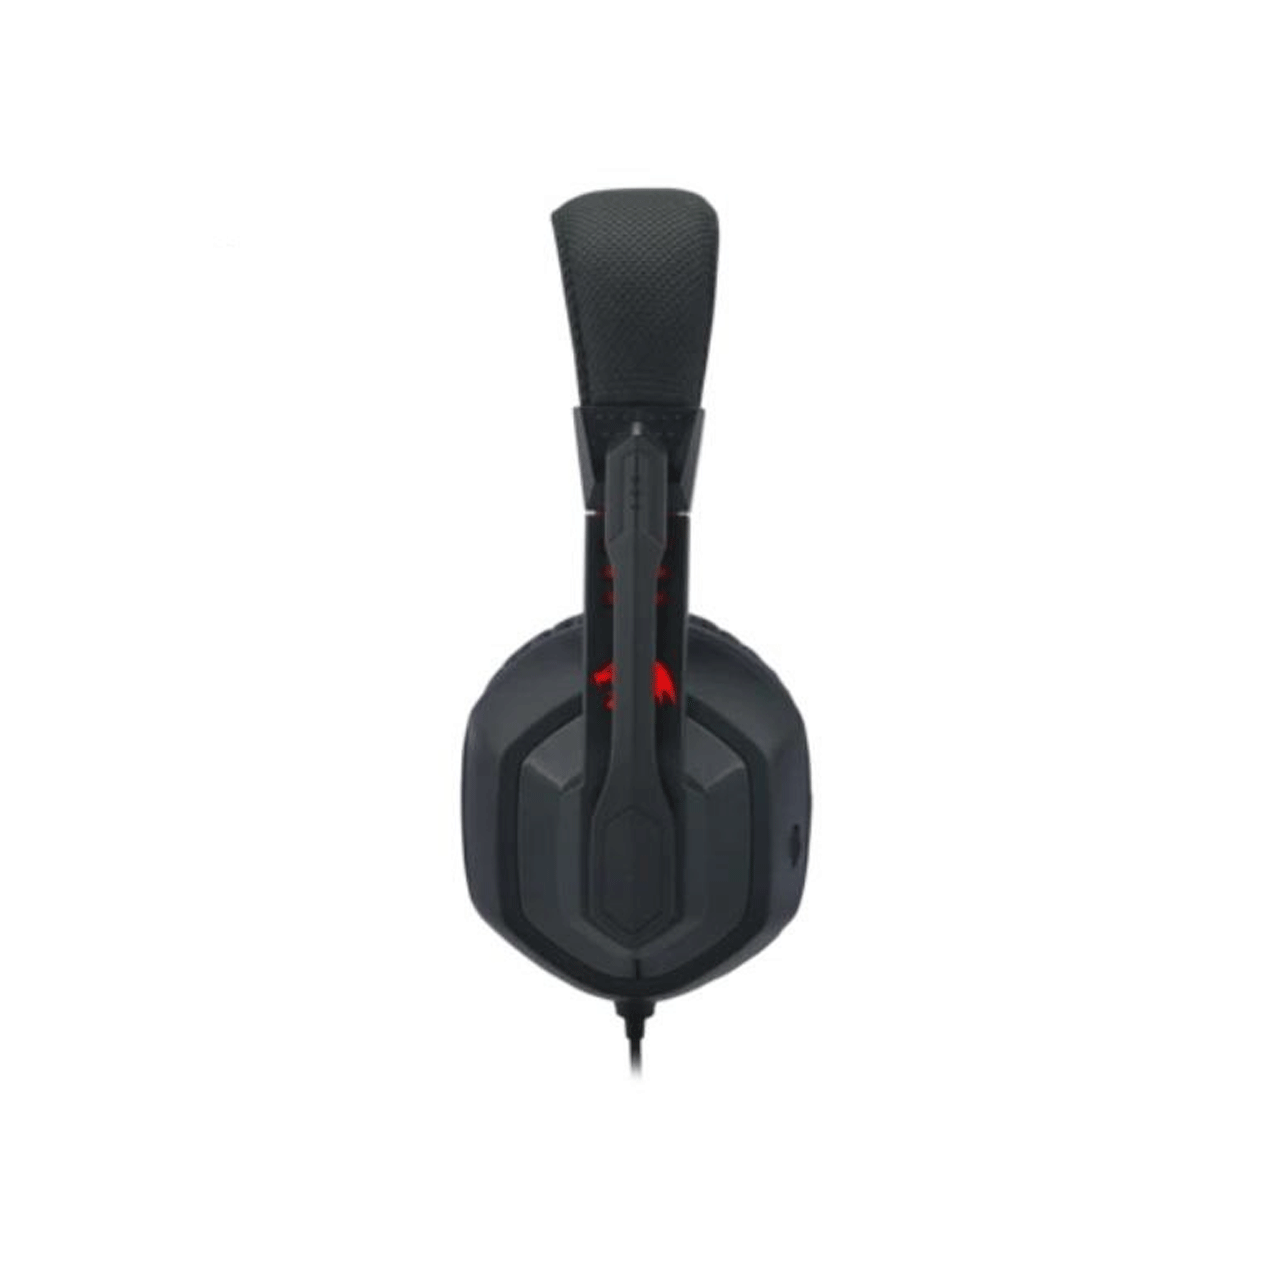 Redragon-2Are8s-H120-headset